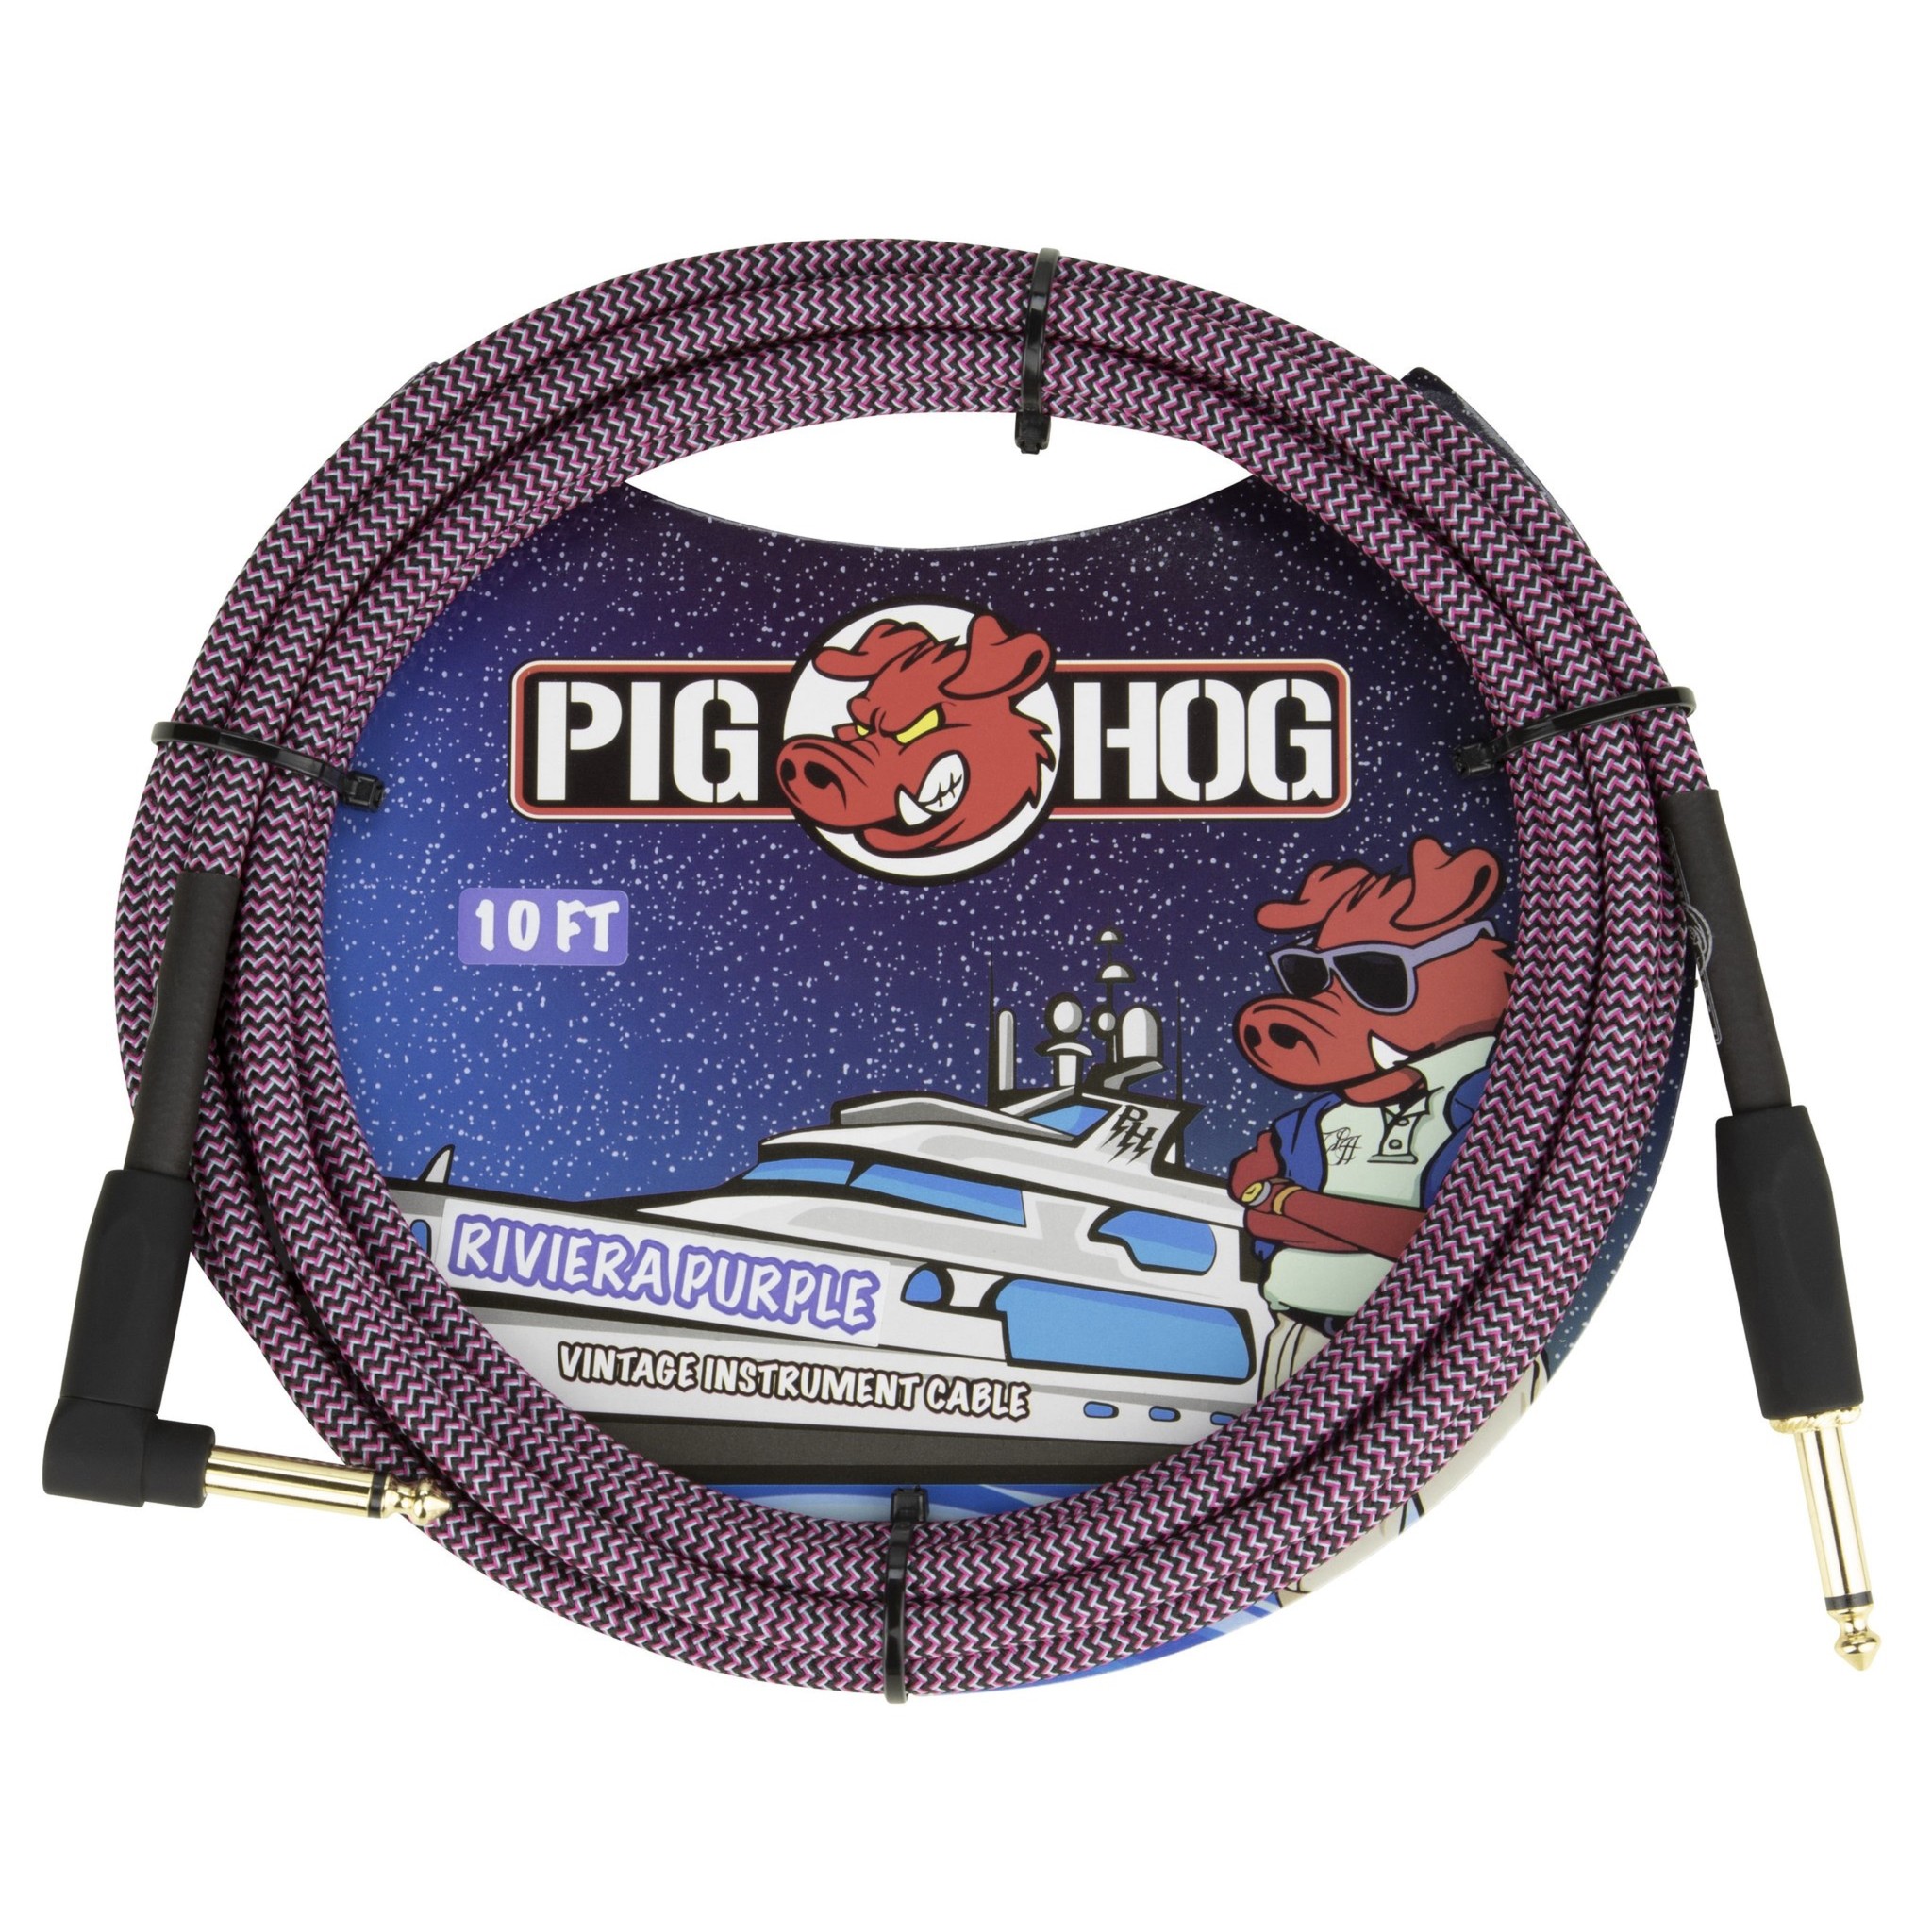 Pig Hog 10-Foot Vintage Woven Instrument Cable, 1/4" Straight-Right Angle, Riviera Purple